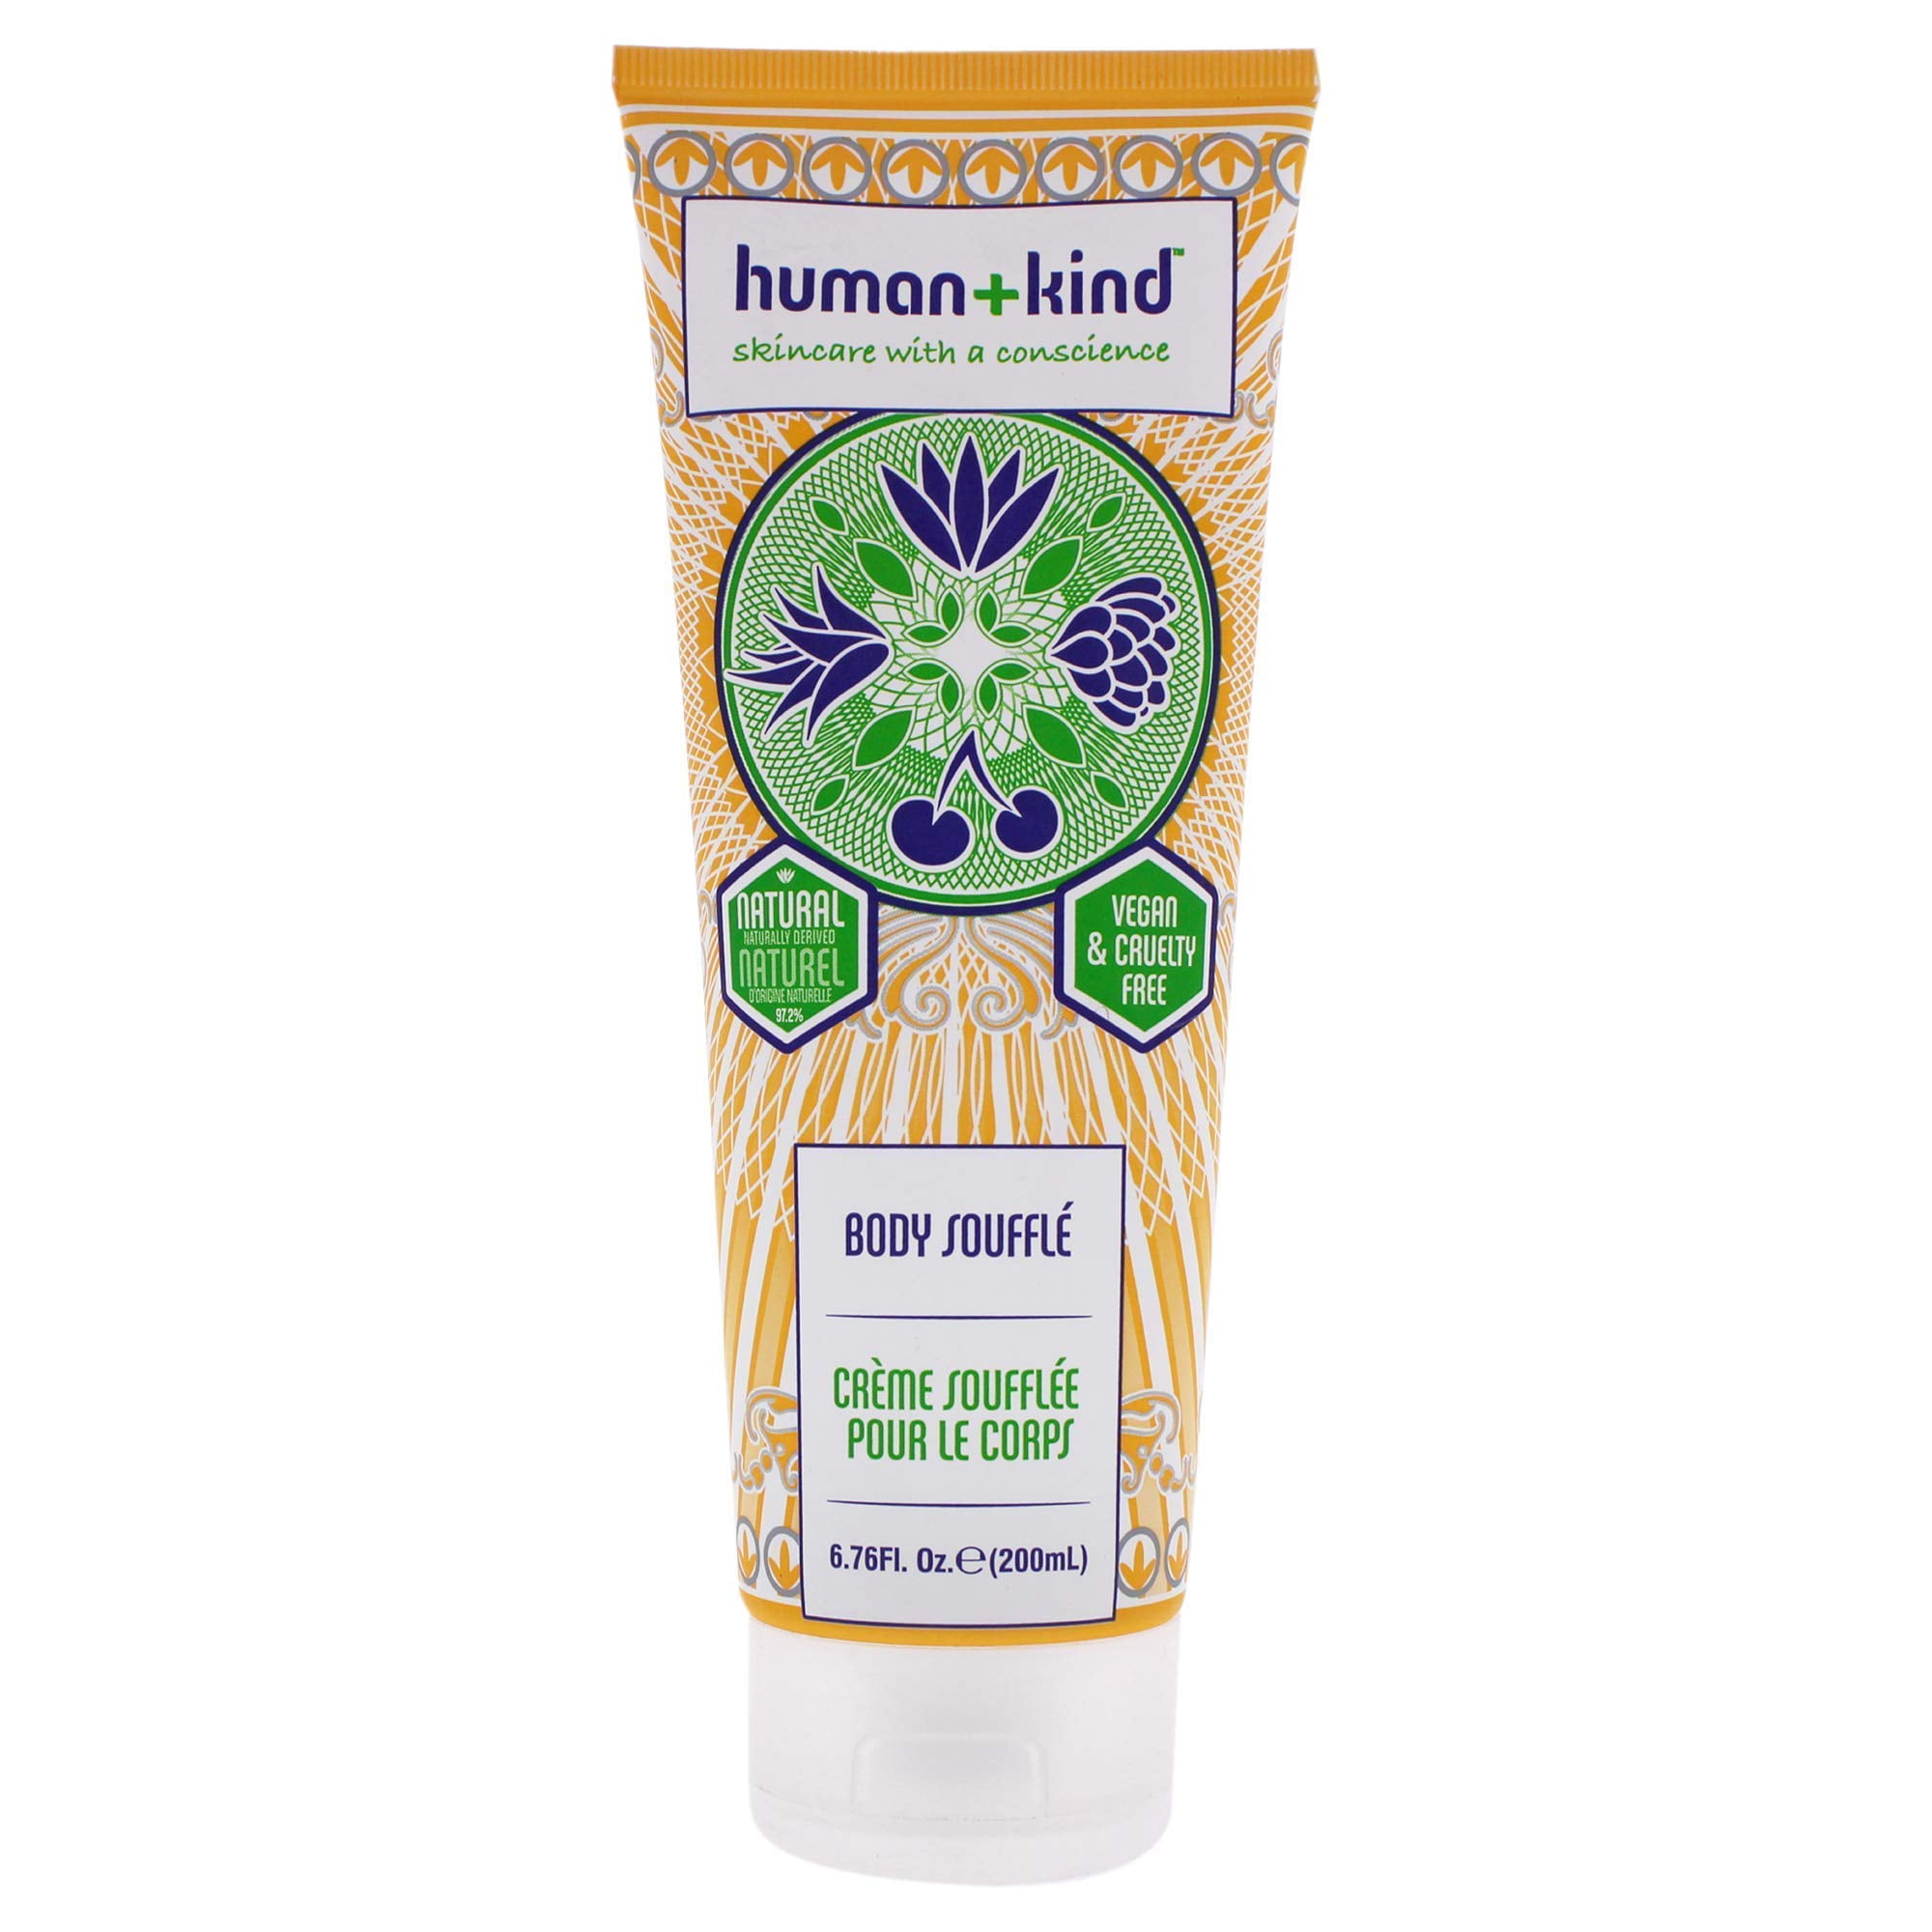 Human+Kind Body Souffle Cream - Original Moisturizer Lotion For Men And Women - Organic, Vegan Healing Cream That Cracked And Rough Skin - The Best Natural Relief Ointment - Tube - 6 - Walmart.com